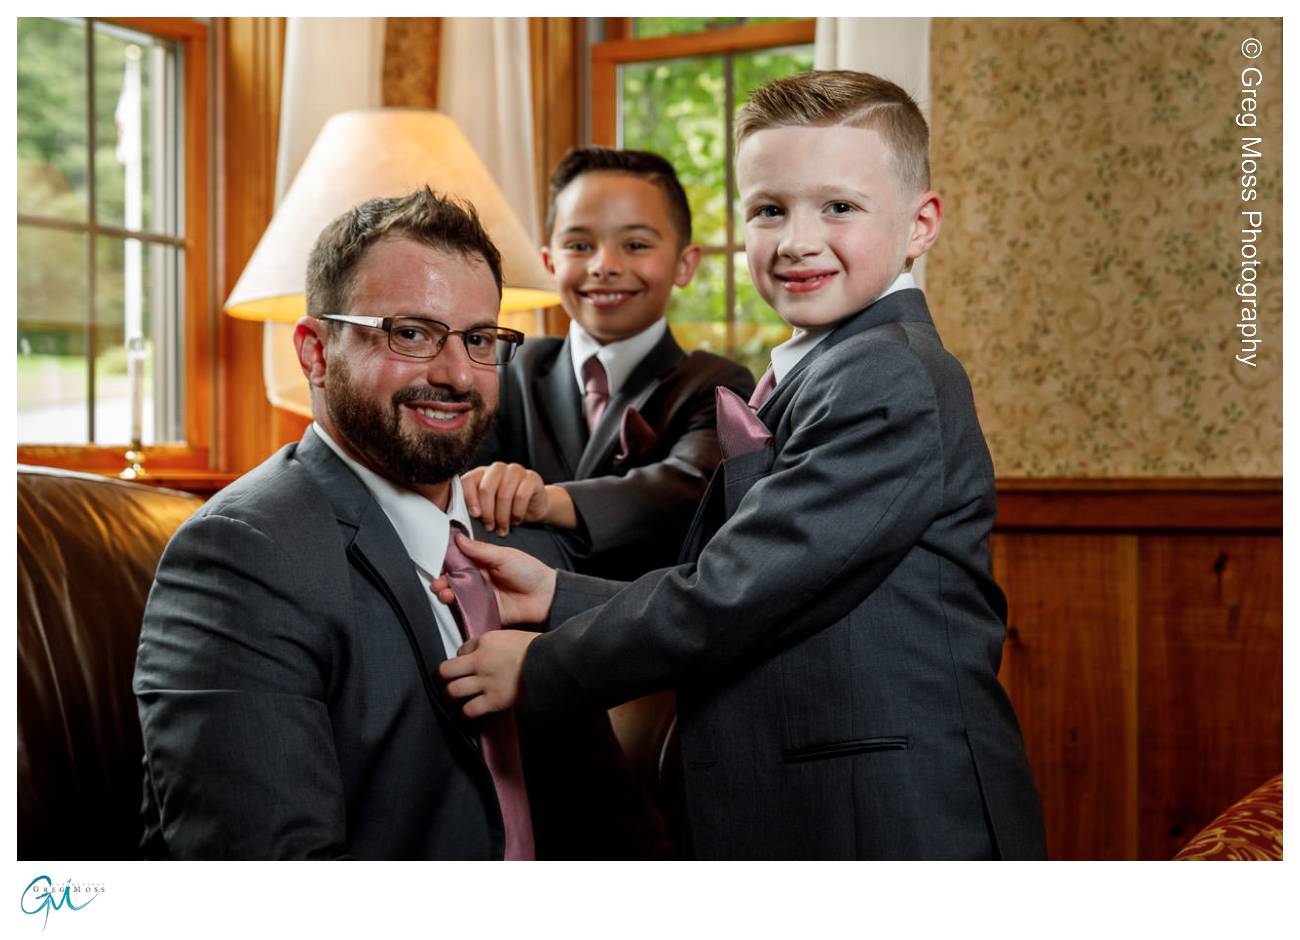 Groom getting ready for wedding with sons